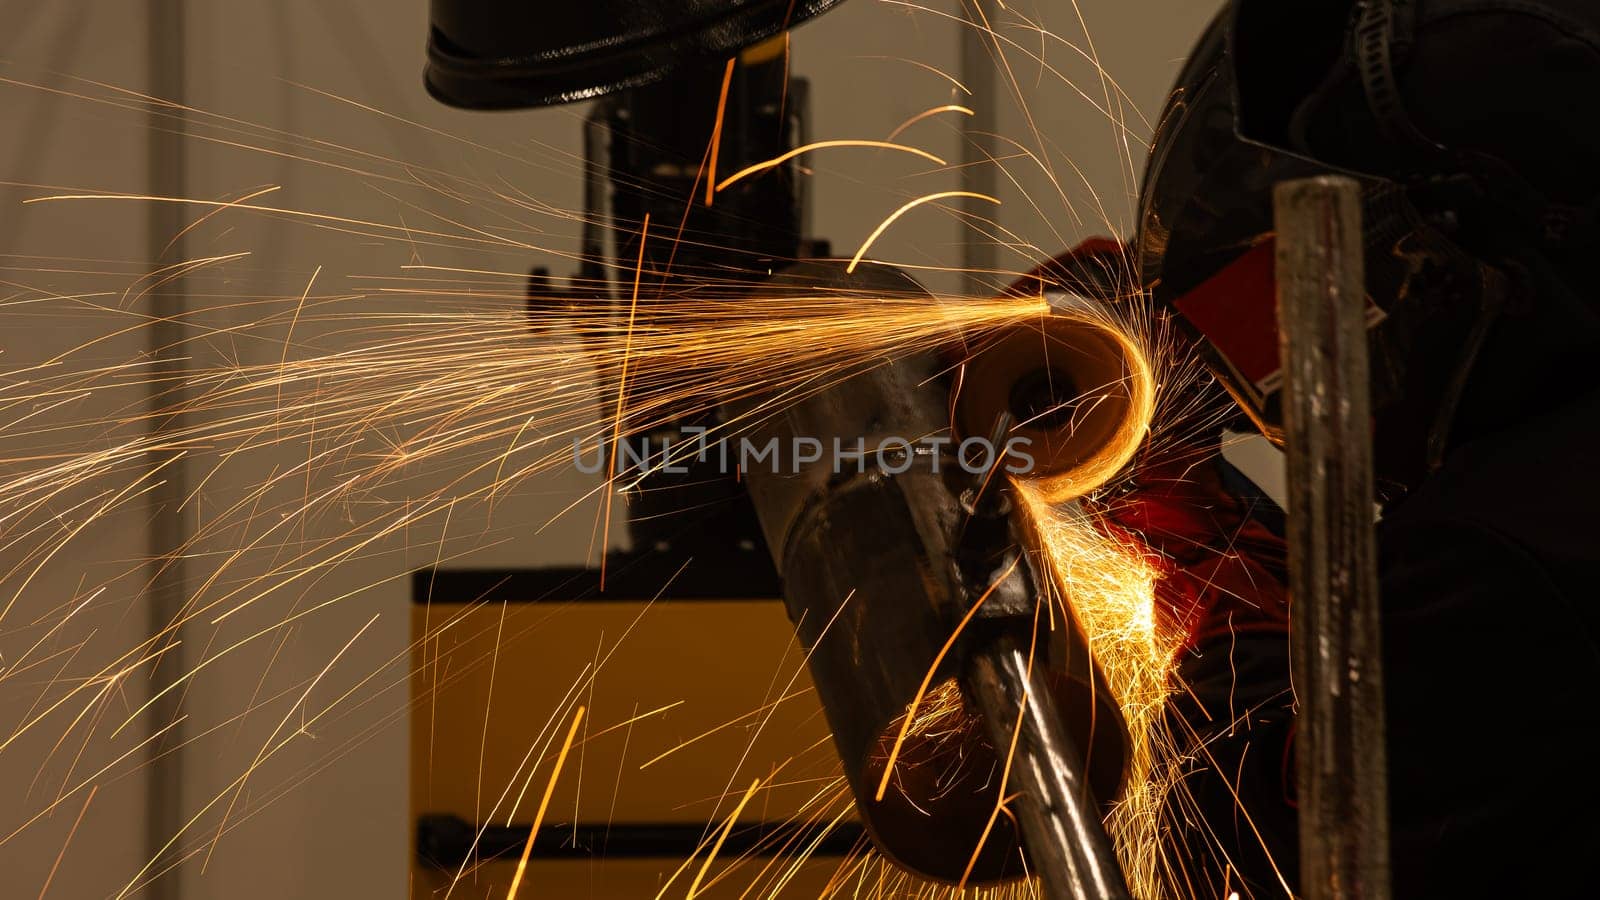 A welder wearing a protective mask cuts a metal pipe. by mrwed54